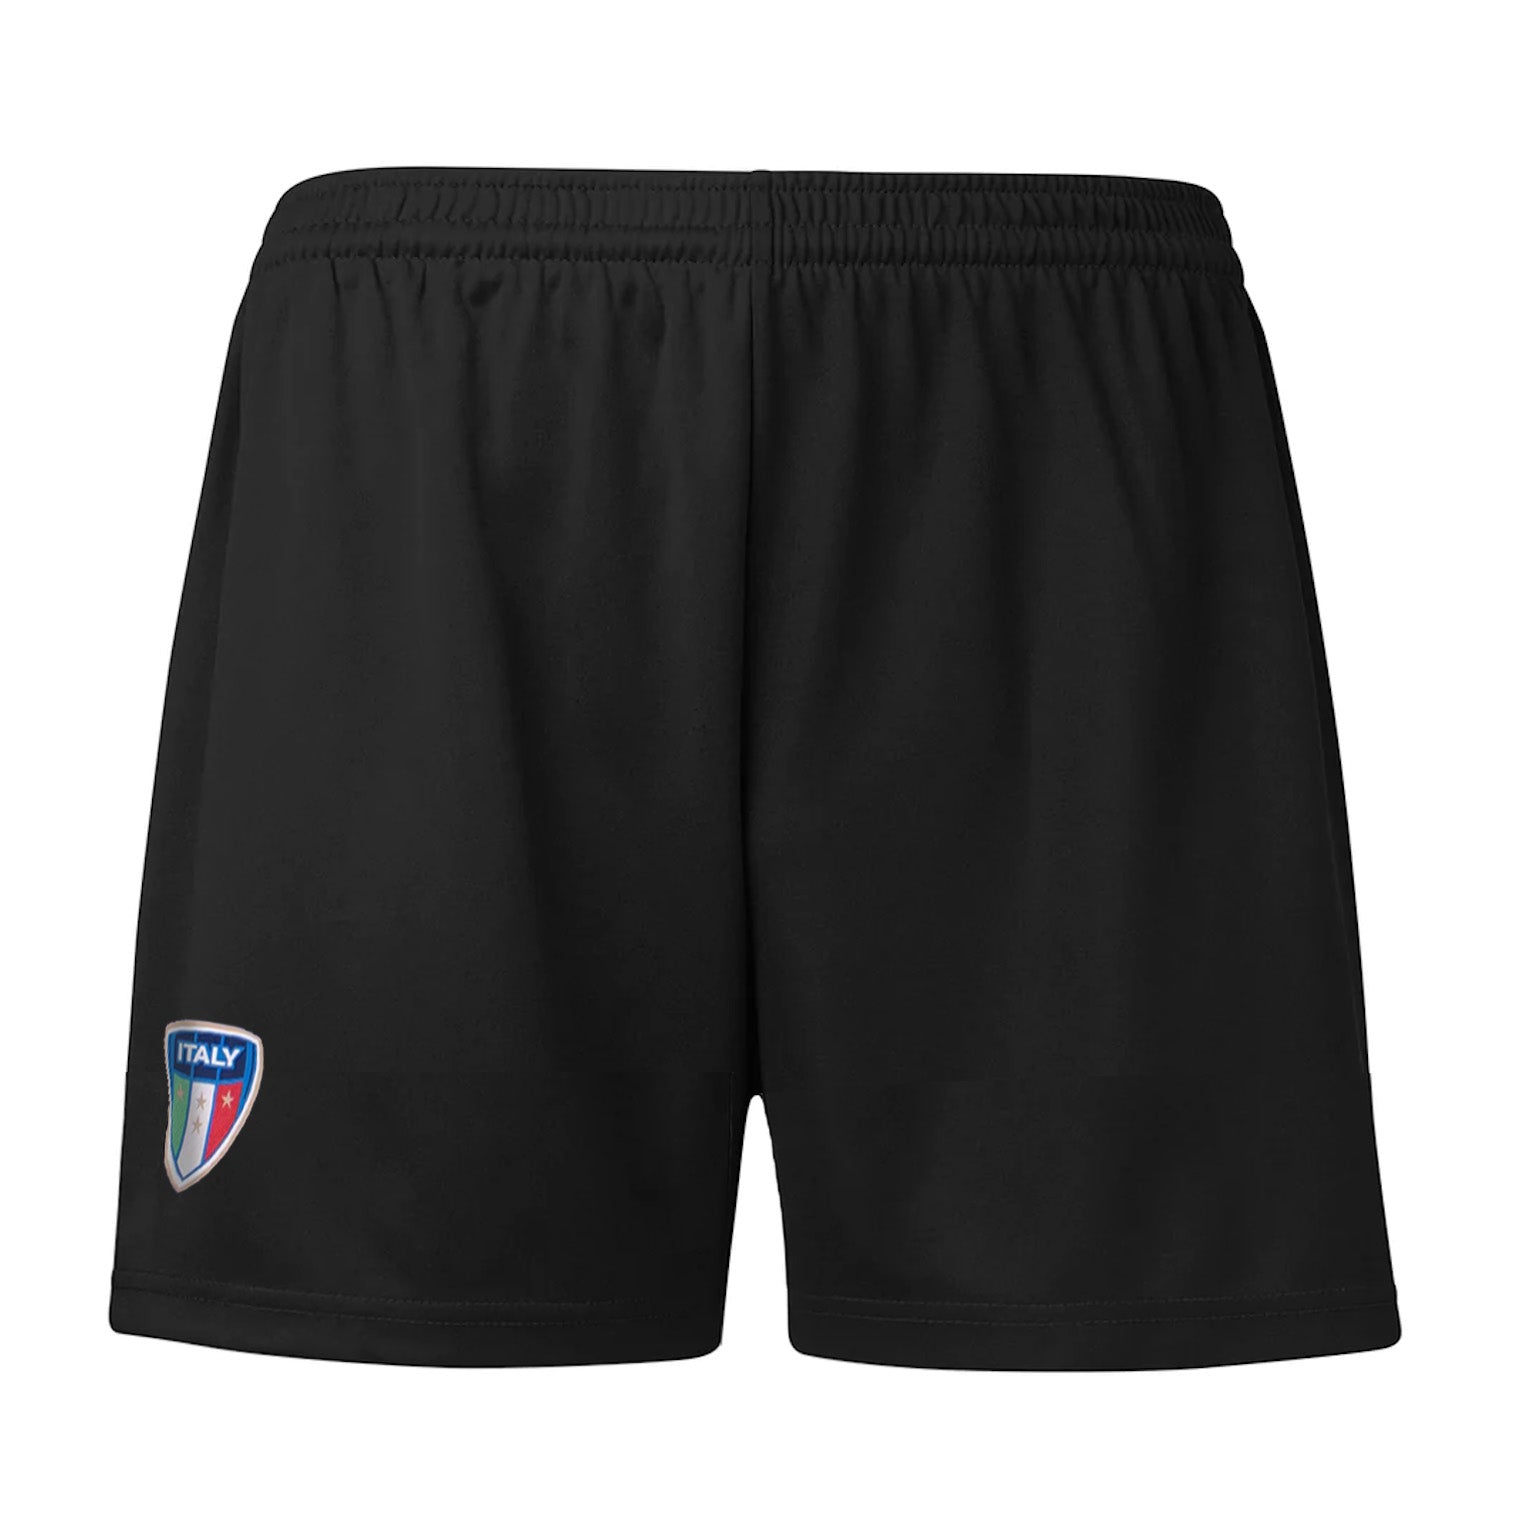 itlay lightweight shorts